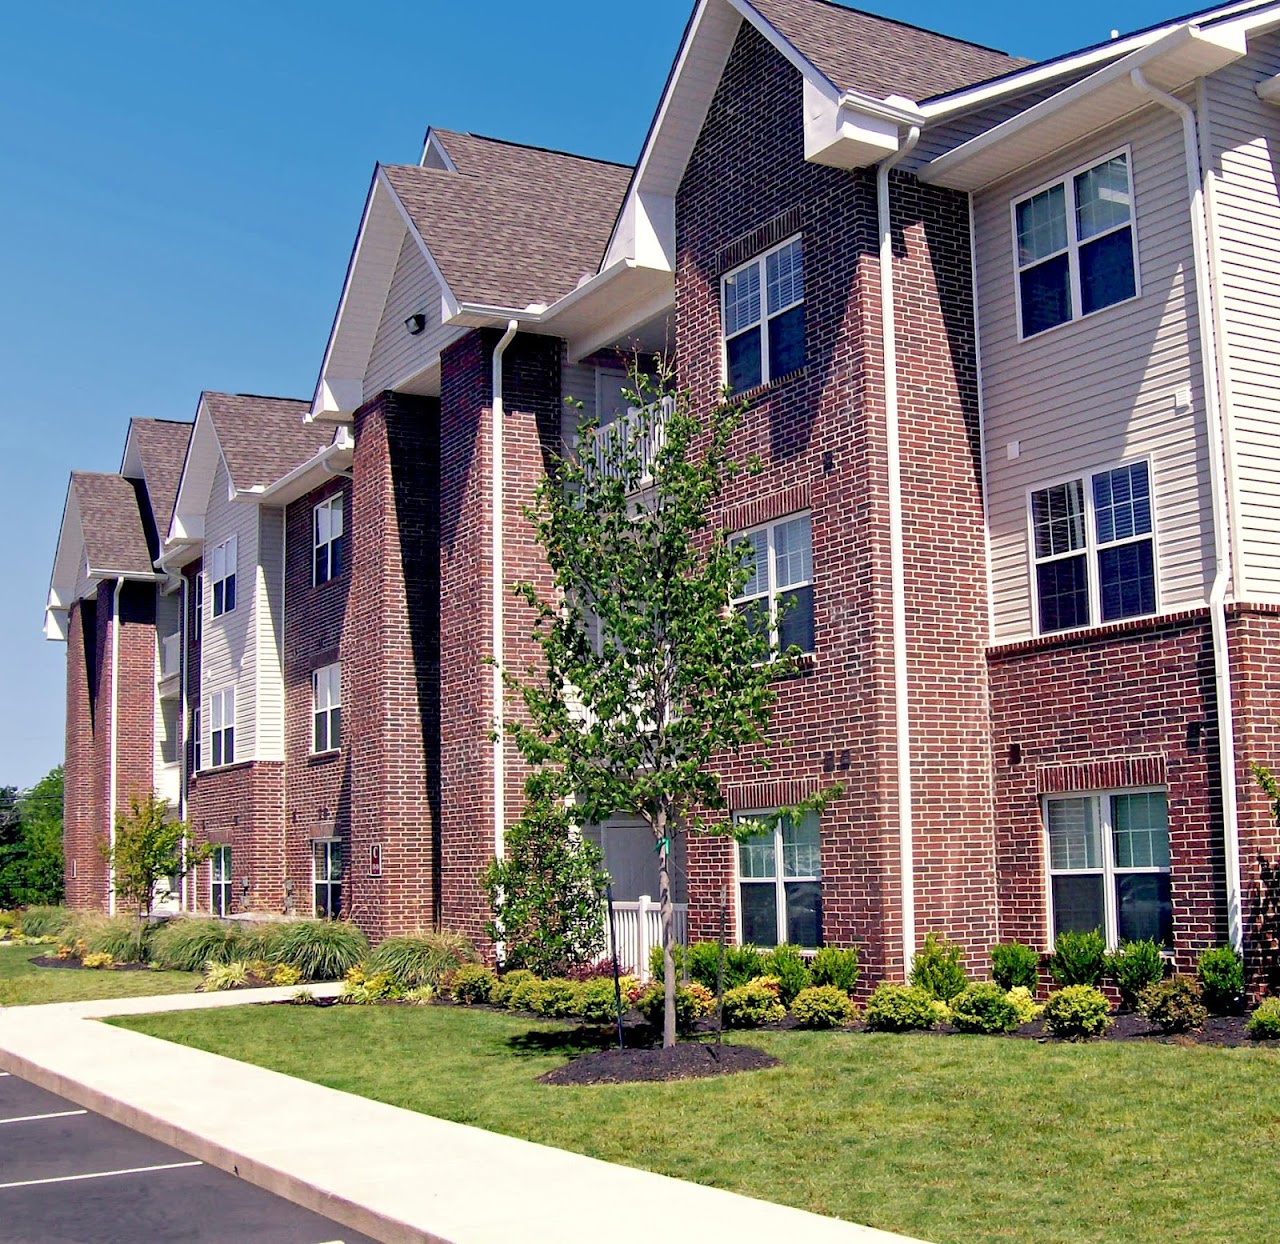 Photo of THE RIDGE AT LEBANON. Affordable housing located at W. BADDOUR PARKWAY & 502 FAIRVIEW AVE. LEBANON, TN 37087